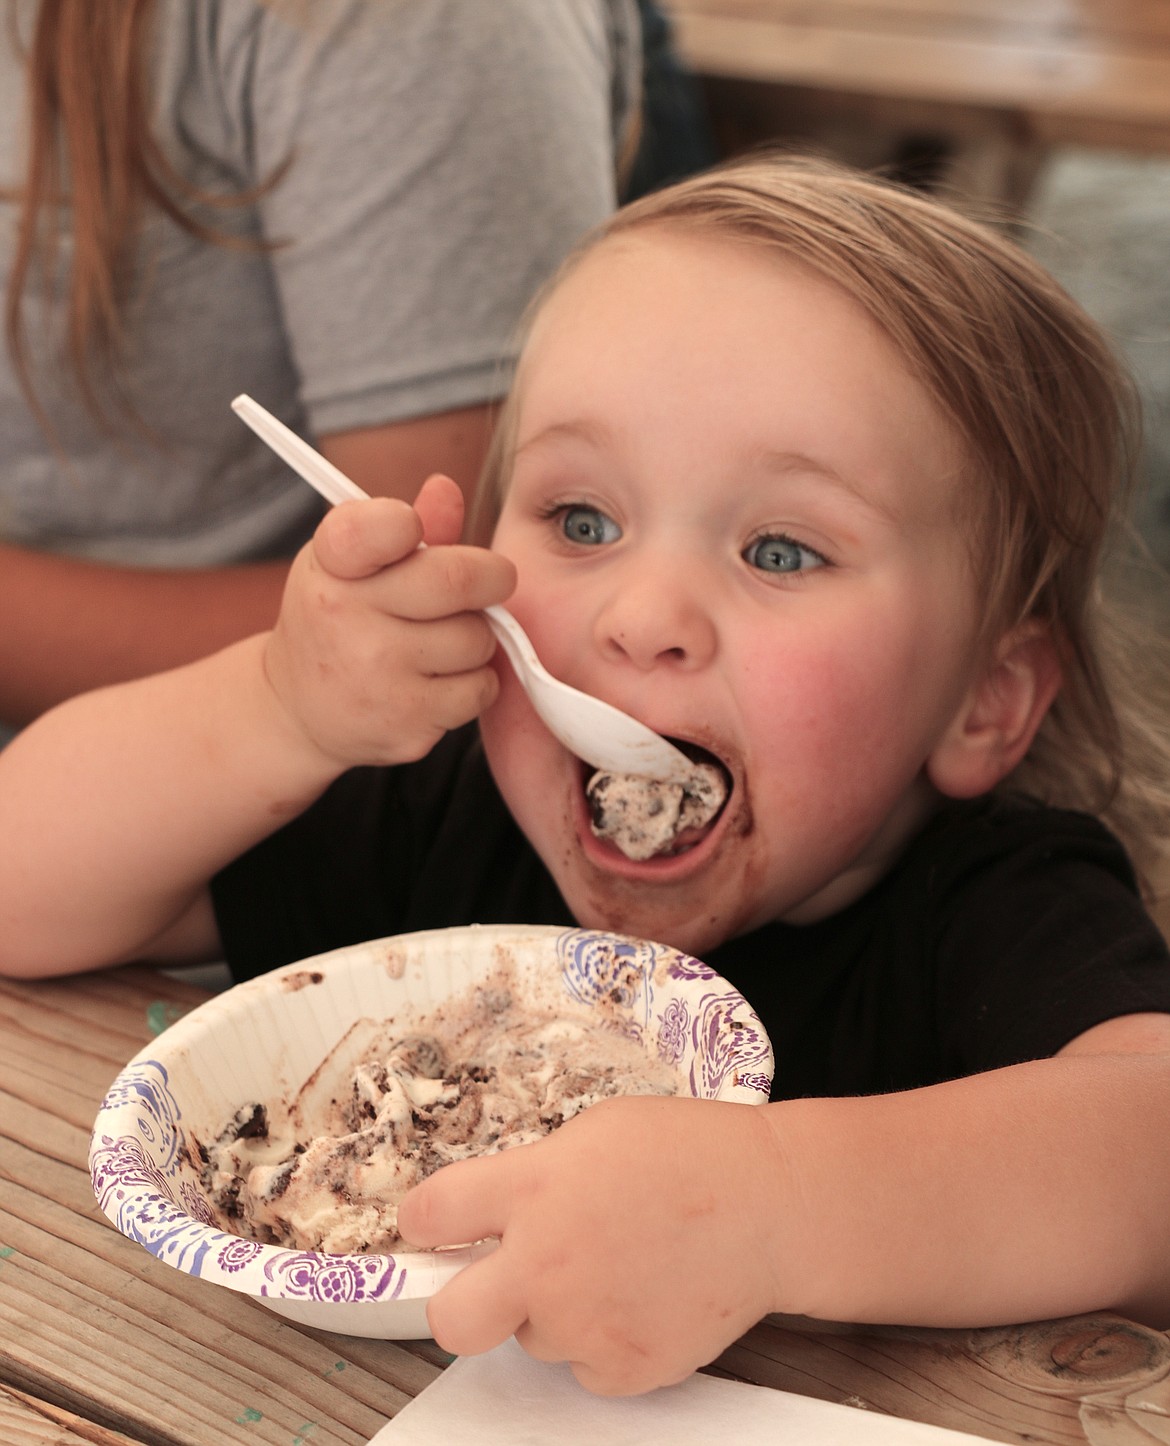 A young contestant opens wide for a big bite of ice cream during an ice cream eating contest at the Bonner County Fair on Saturday.